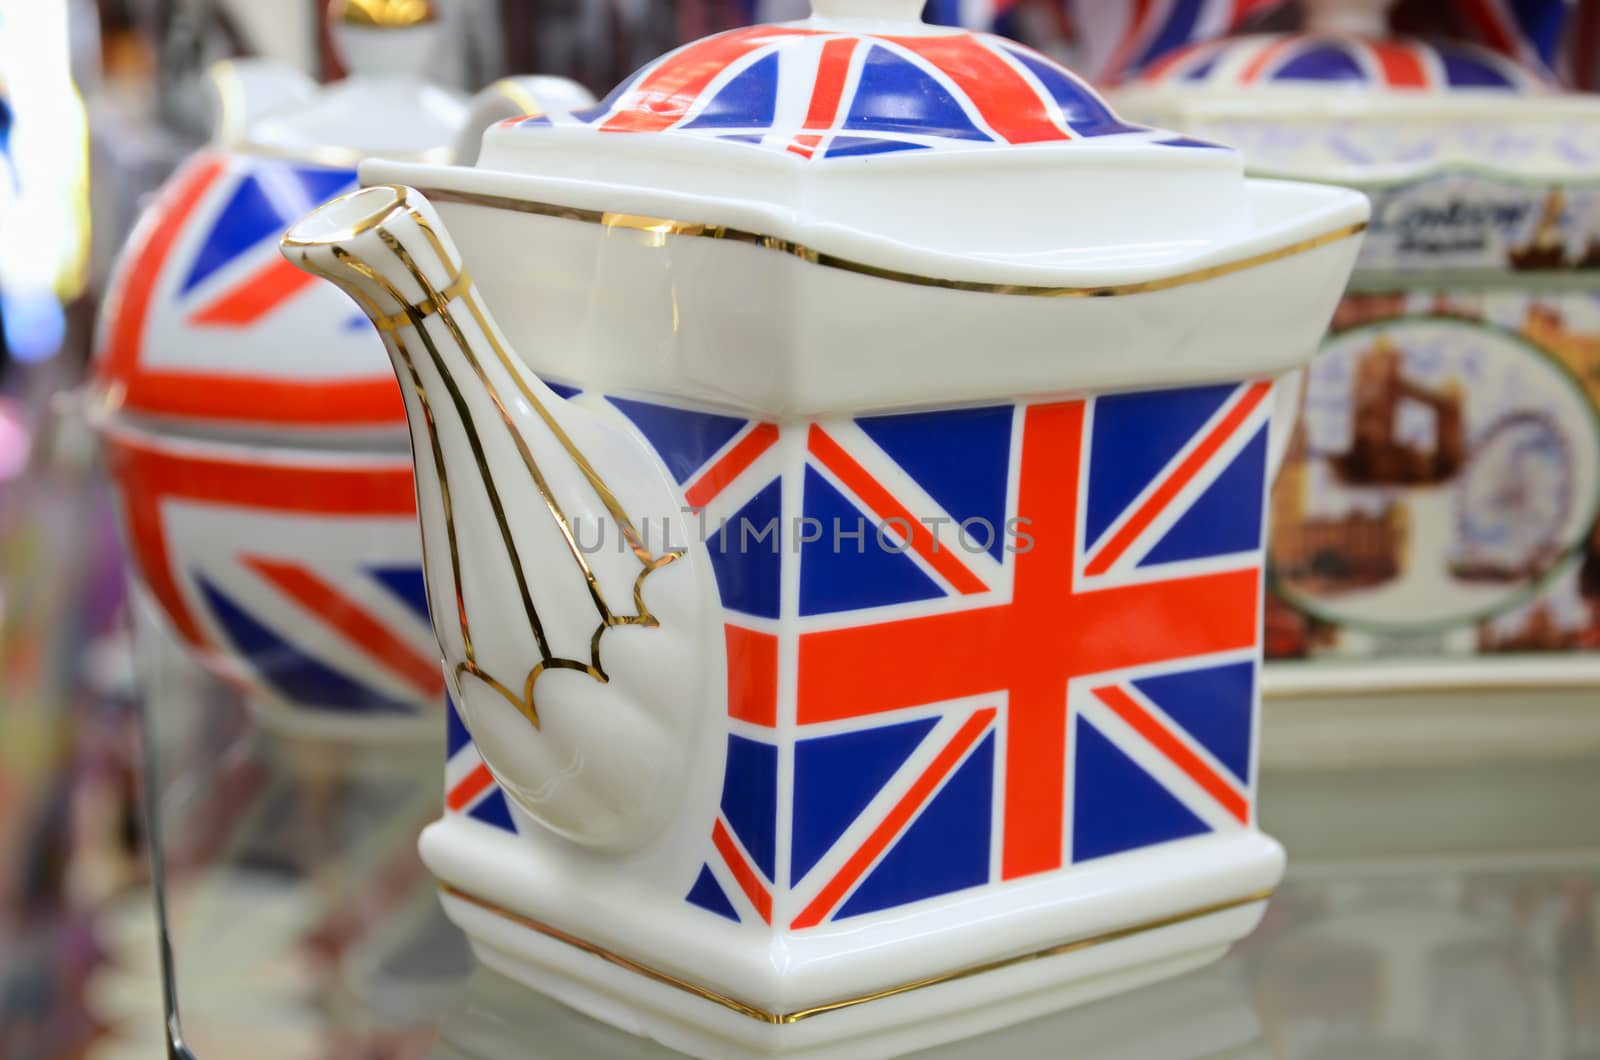 Souvenirs from UK , british icon to buy in gift shops

